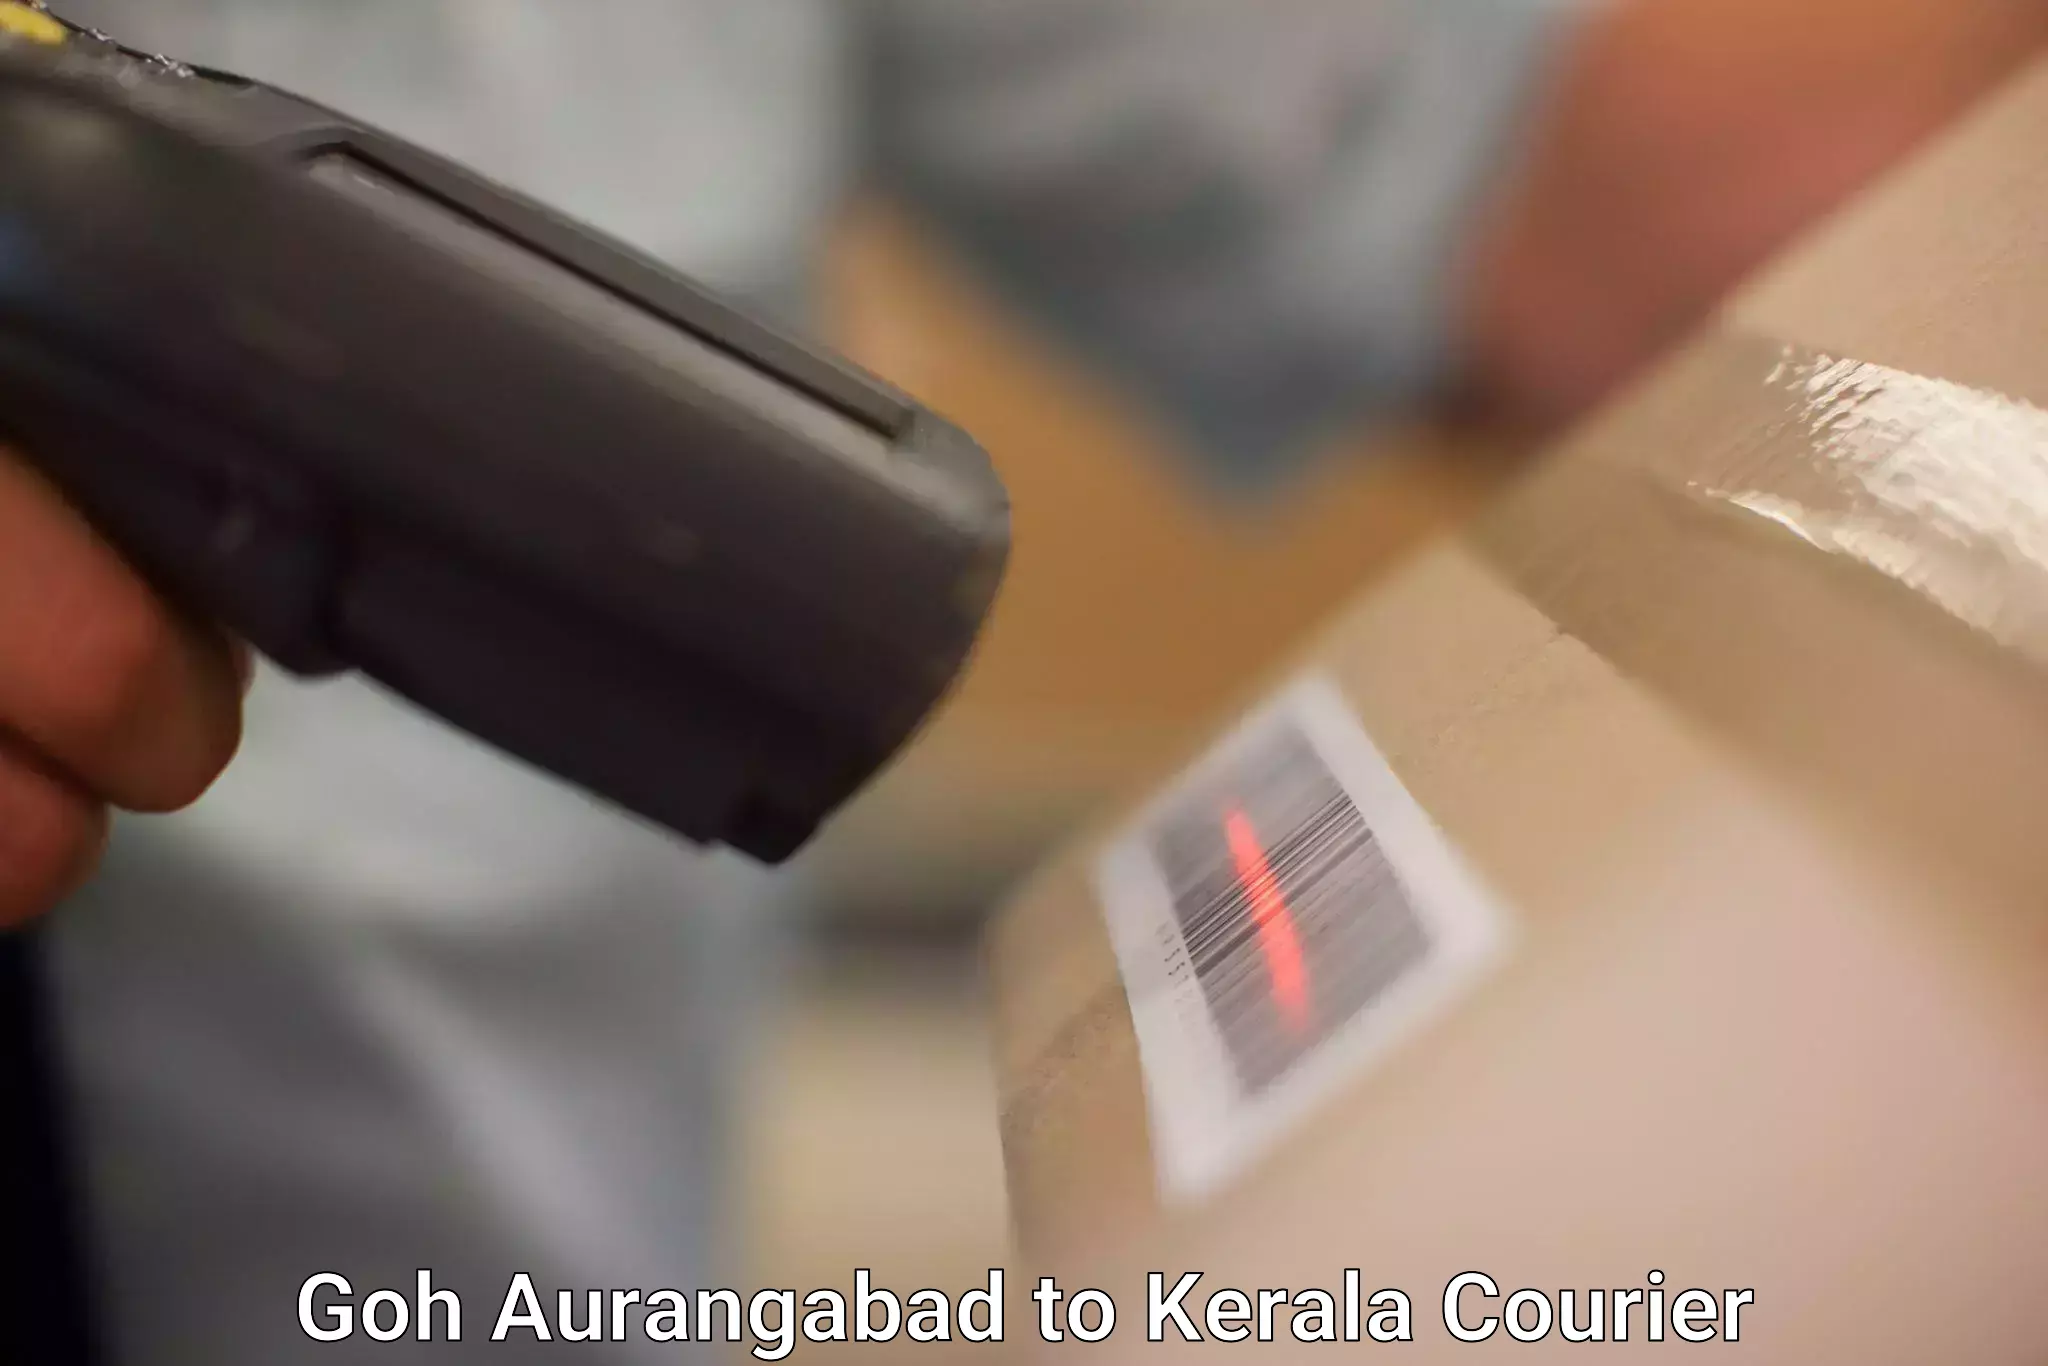 State-of-the-art courier technology Goh Aurangabad to Agali